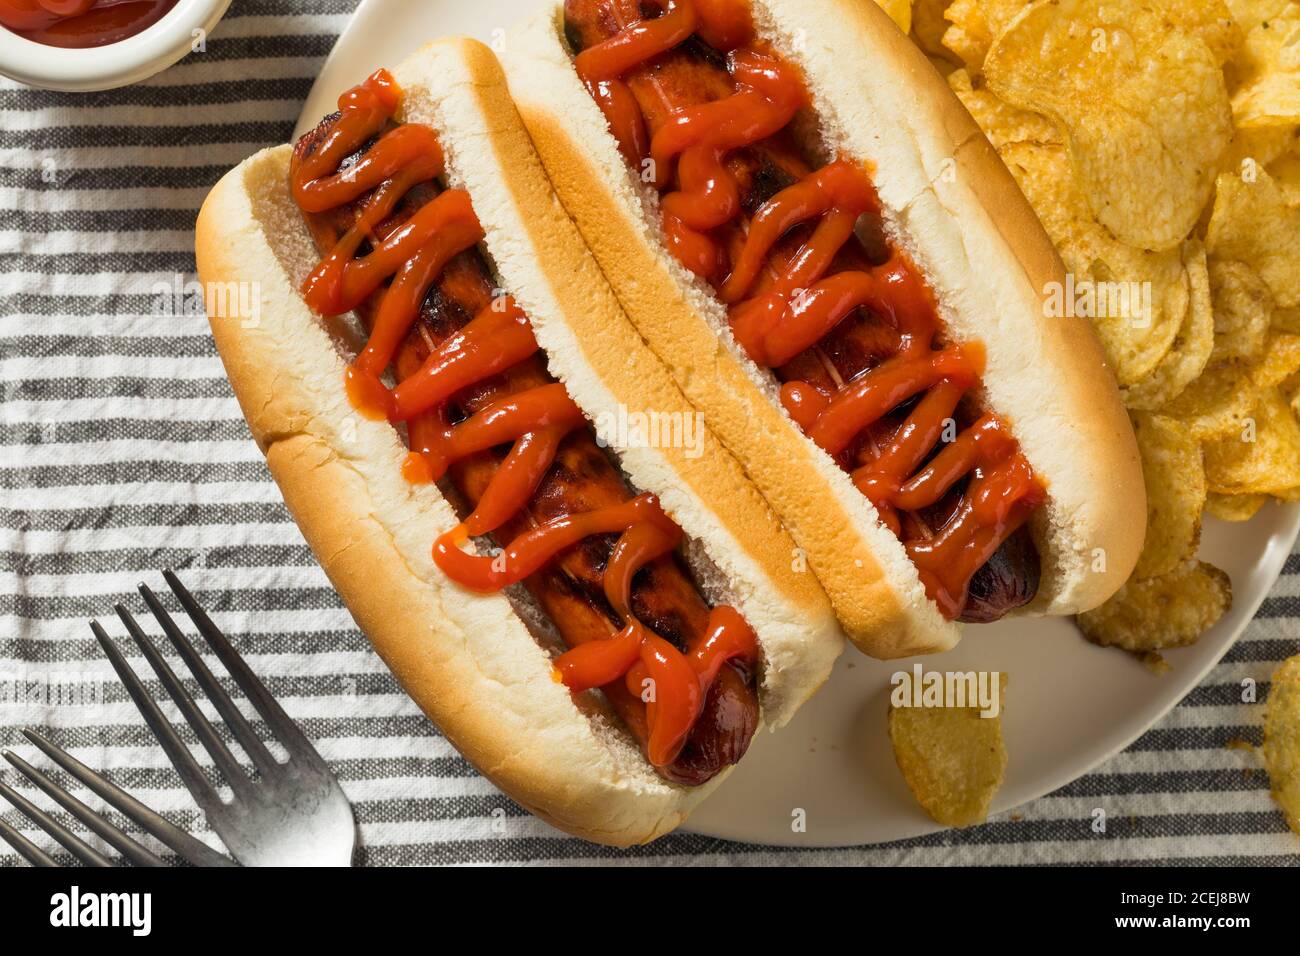 American Hot Dog with Ketchup with Potato Chips Stock Photo